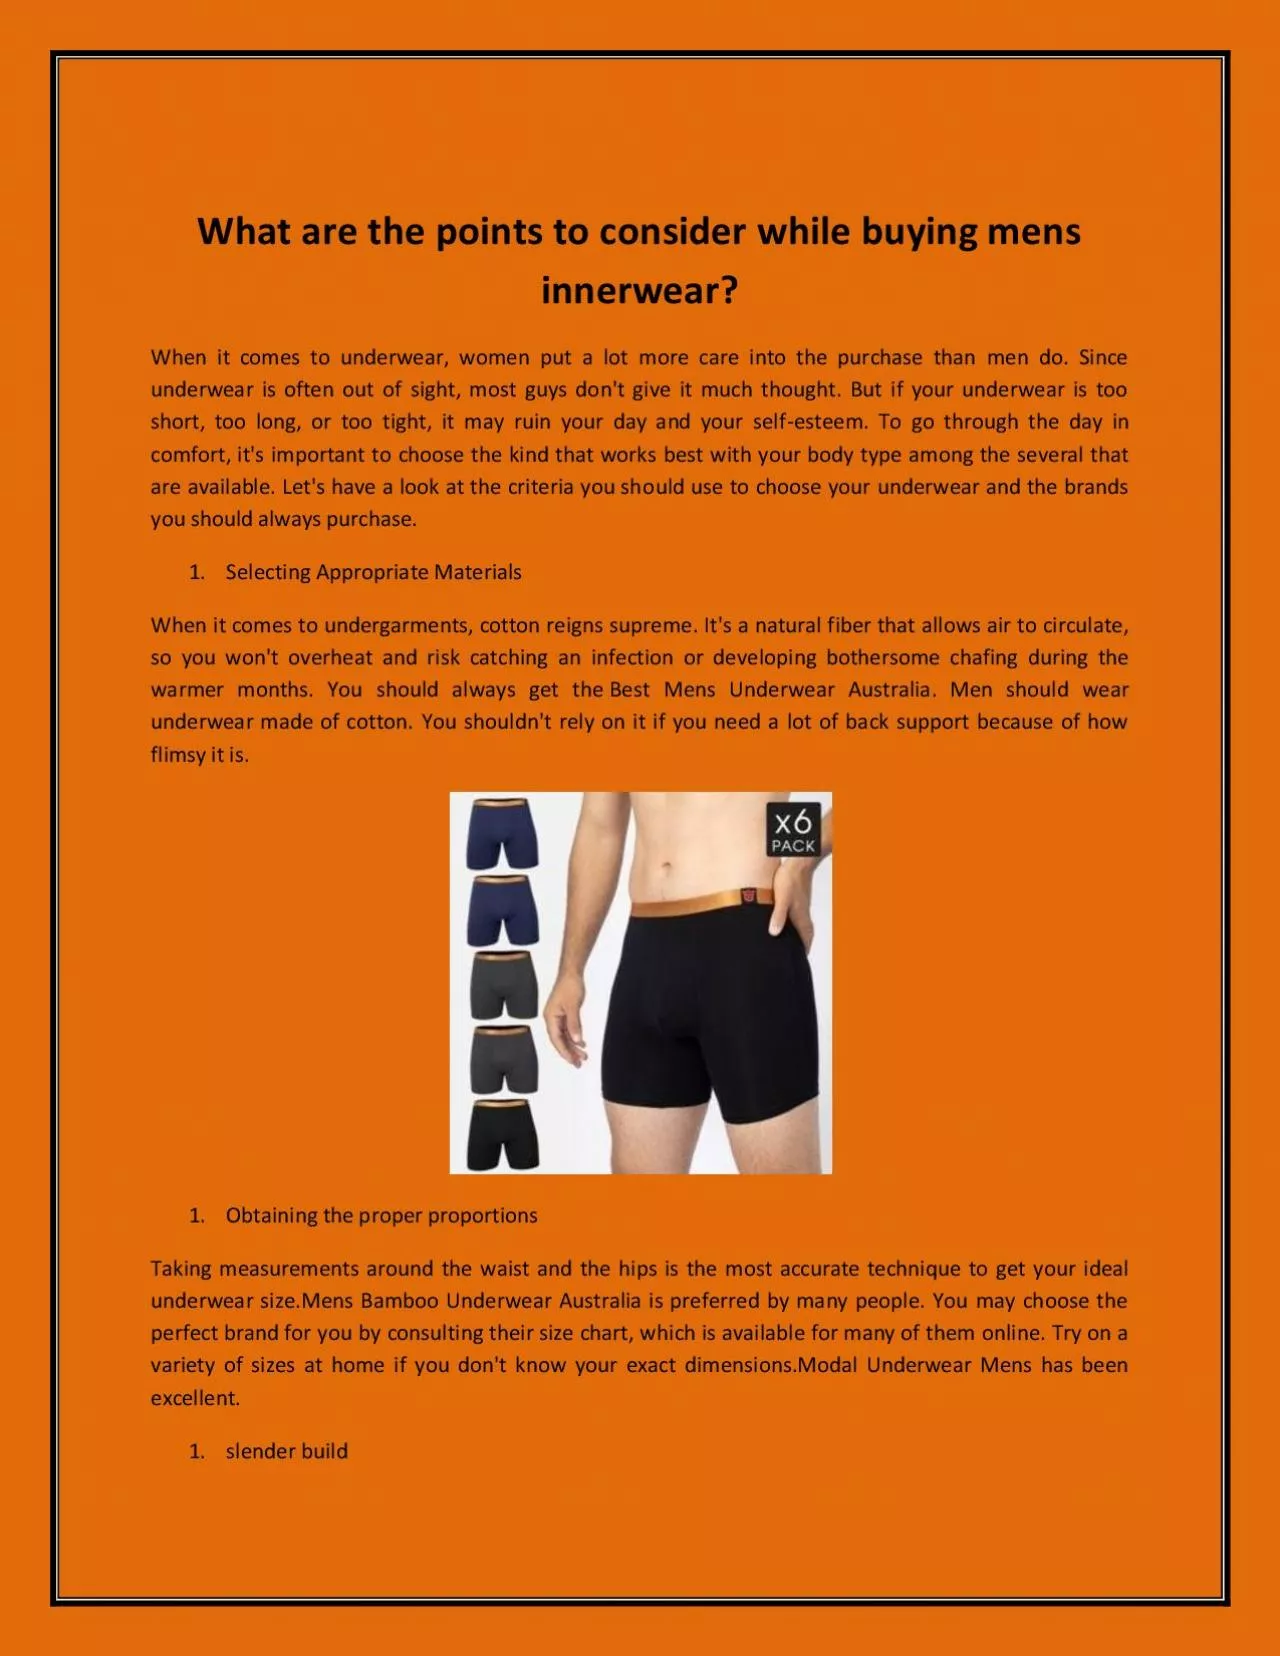 What are the points to consider while buying mens innerwear?